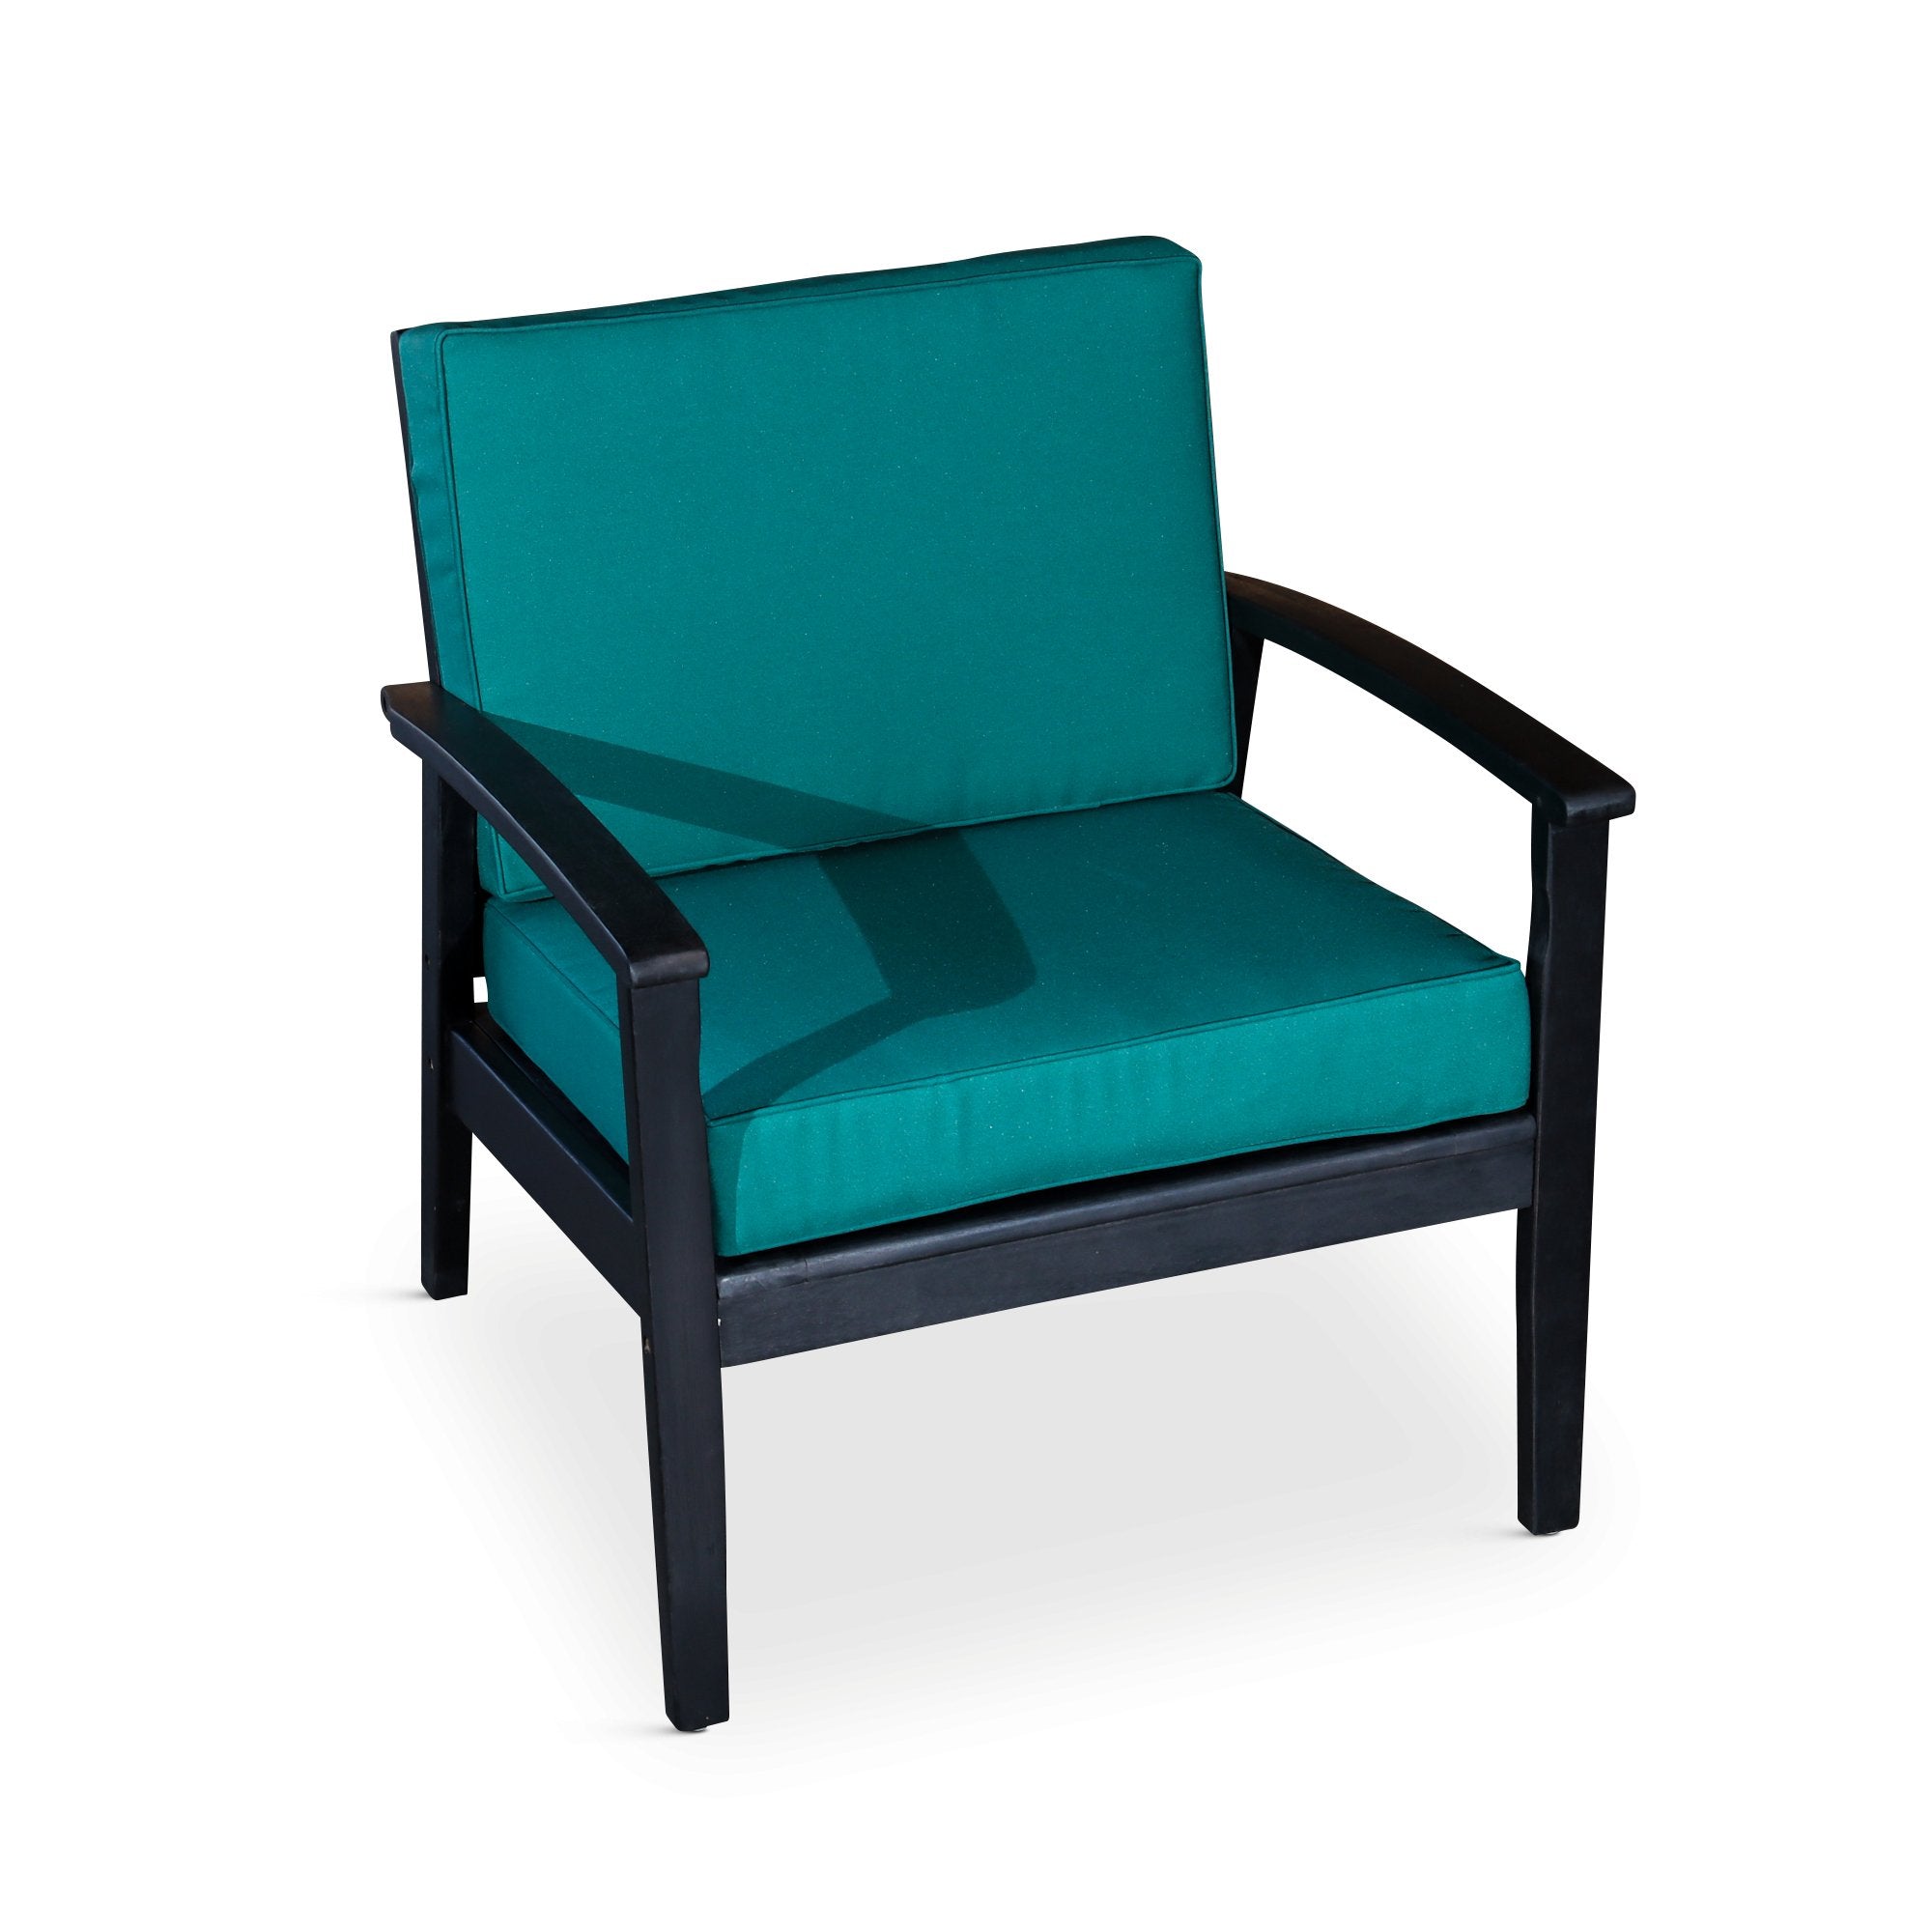 Deep Seat Outdoor Chair, Espresso Finish, Dark Green Cushions - Tuesday Morning-Chairs & Seating